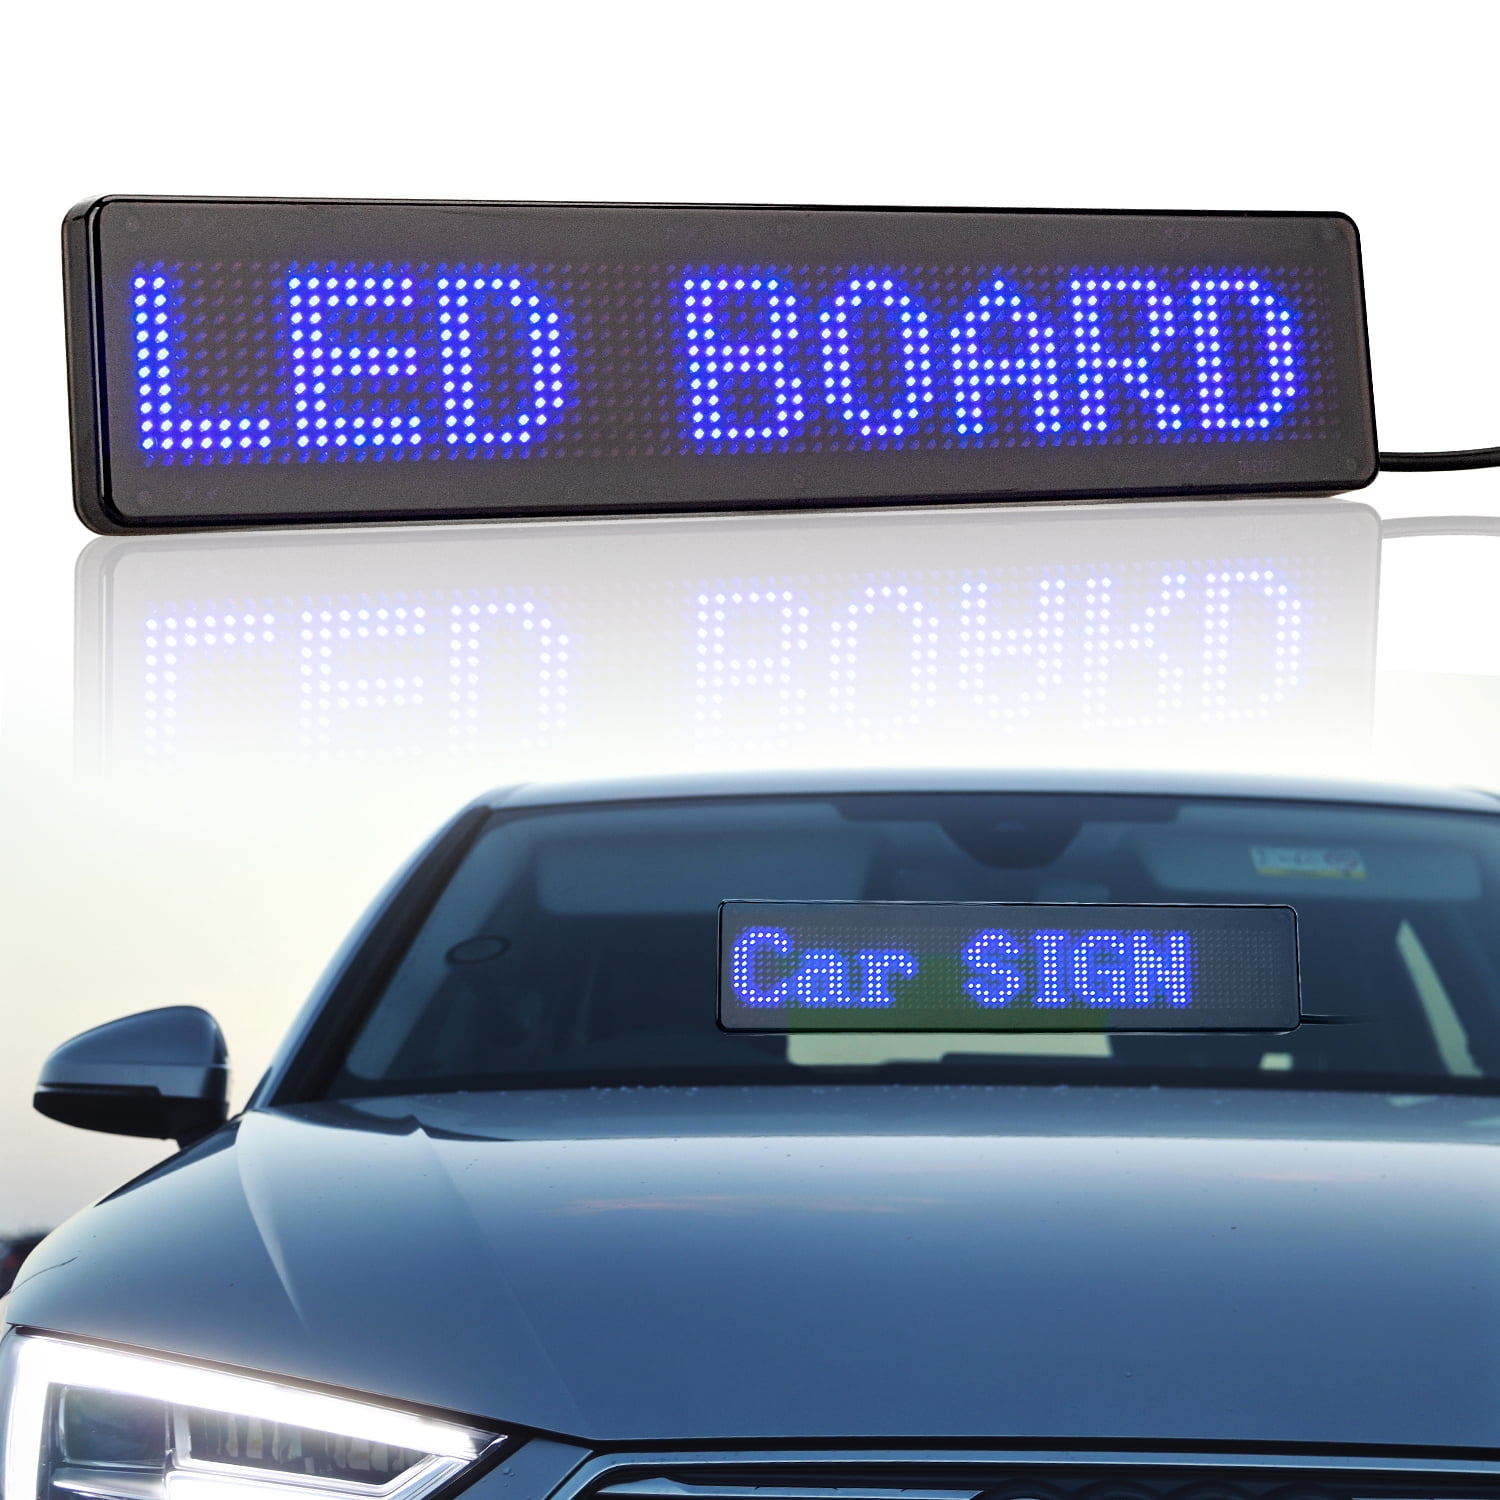 Leadleds DC 5V LED Sign Bluetooth Control Smartphone Programmable Scrolling  Message Board for Car Windows, Taxi, Store Front (Blue） 